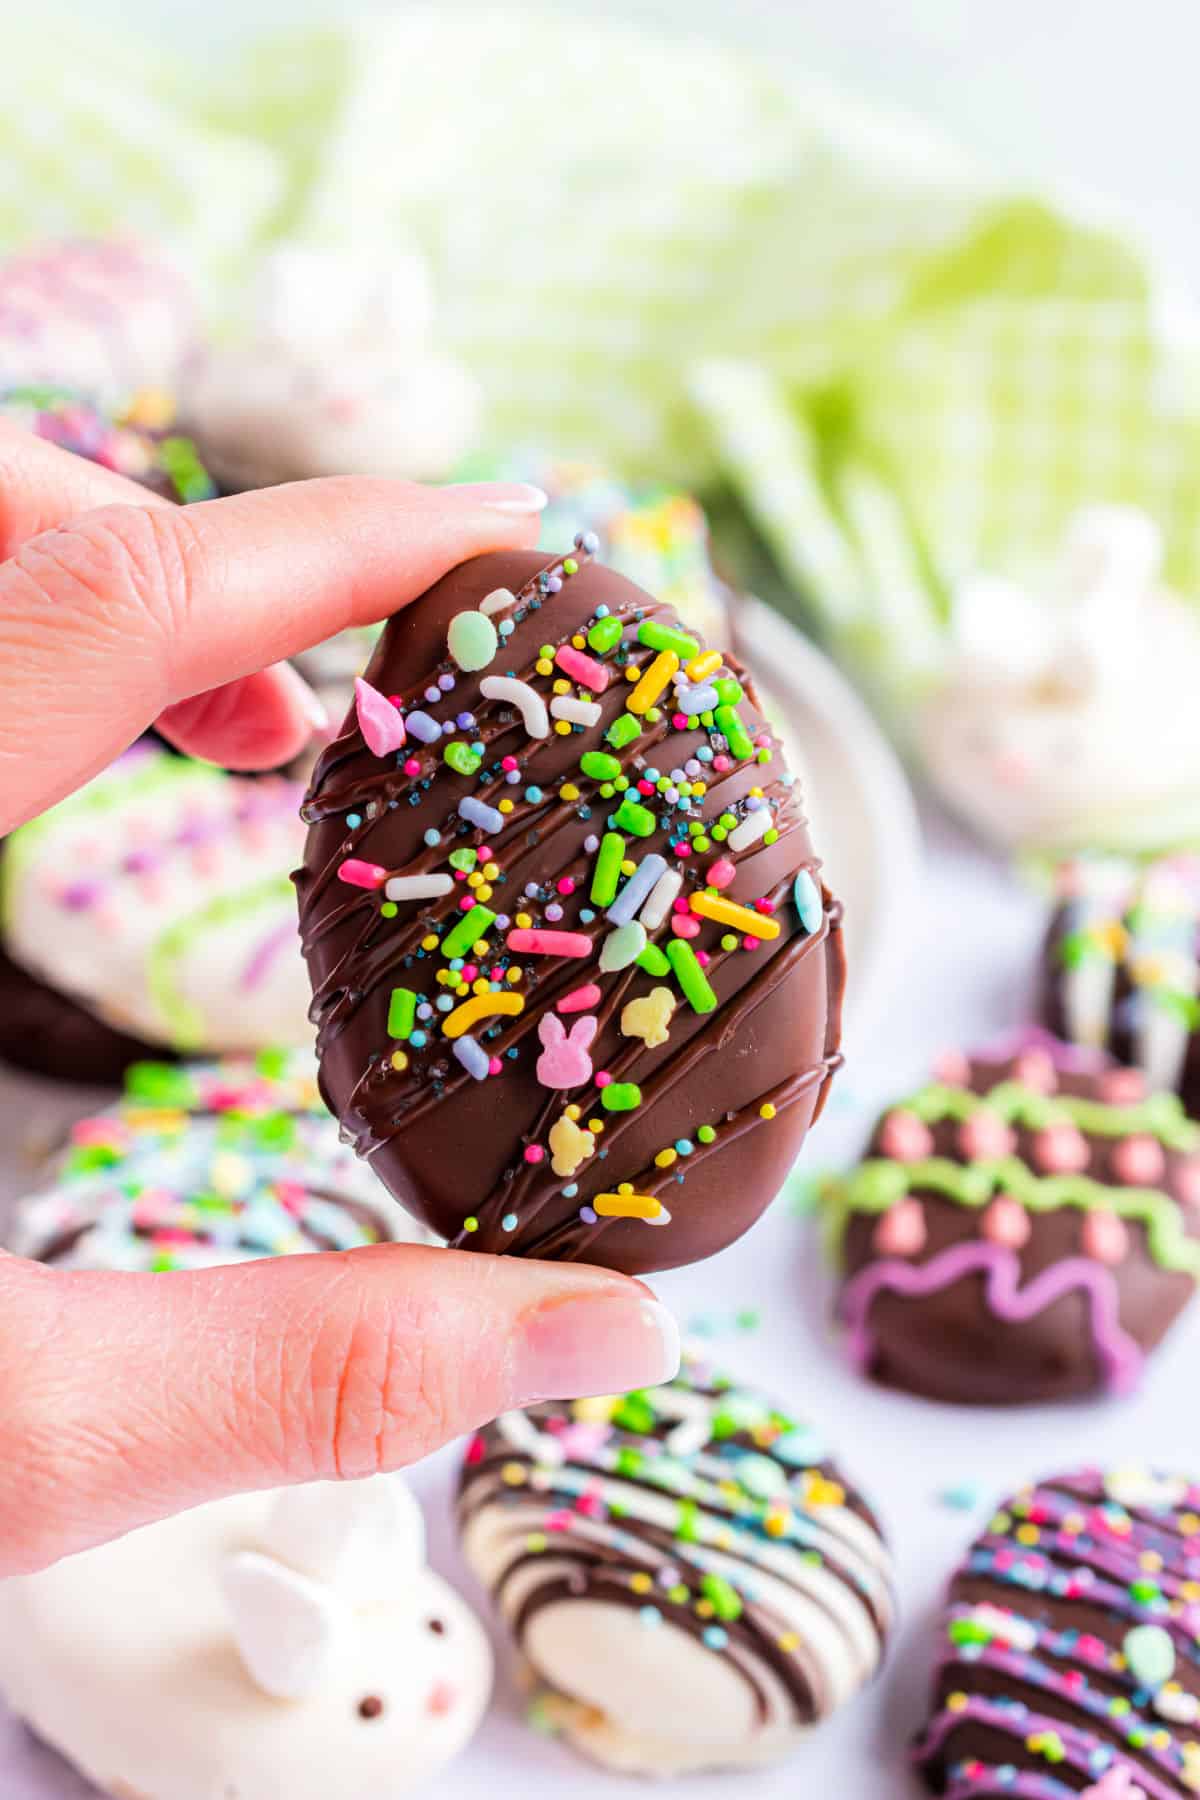 Chocolate coated peanut butter egg with festive sprinkles.